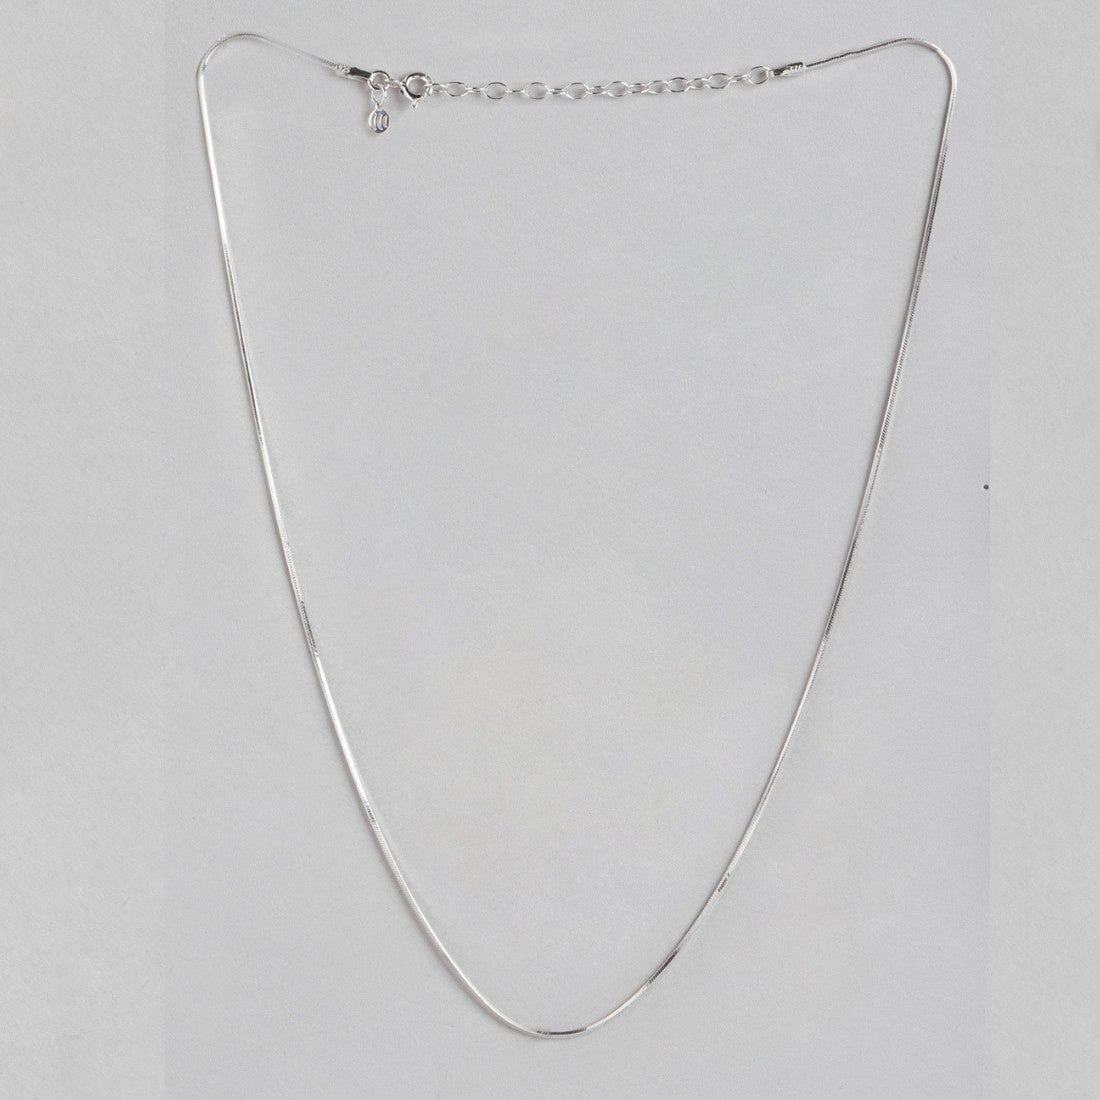 Elegant Serpentine 925 Sterling Silver Silver-Plated Snake Chain